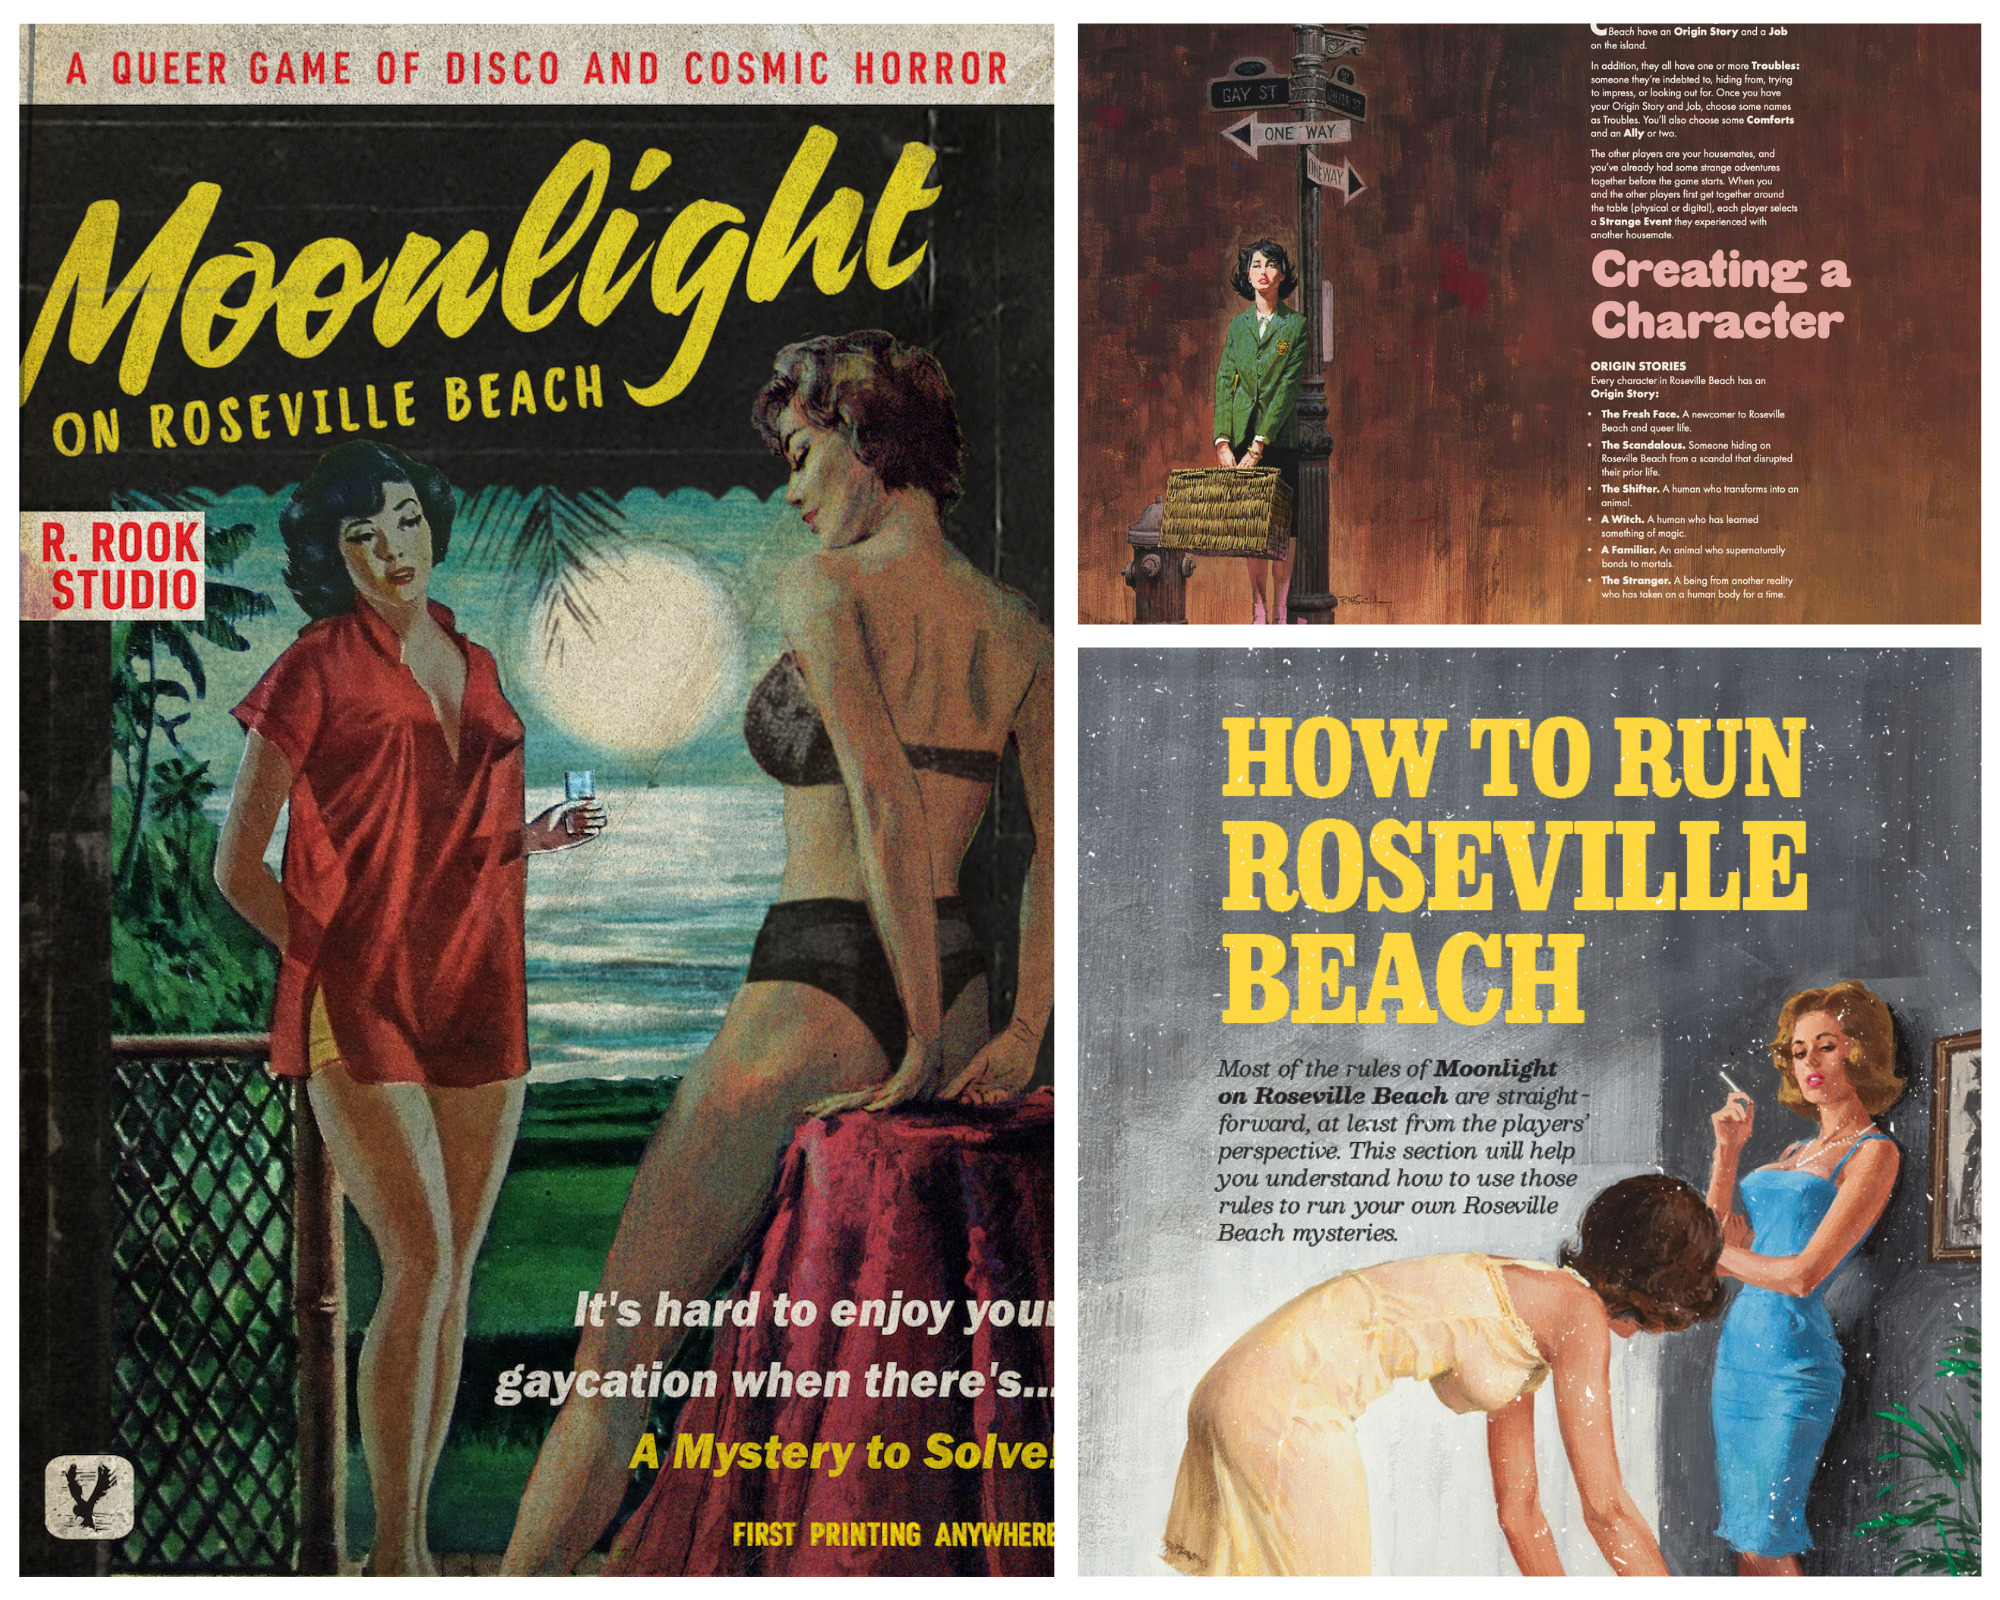 The Roseville Beach cover with the character creation section spread and the "how to run Roseville Beach" spread.